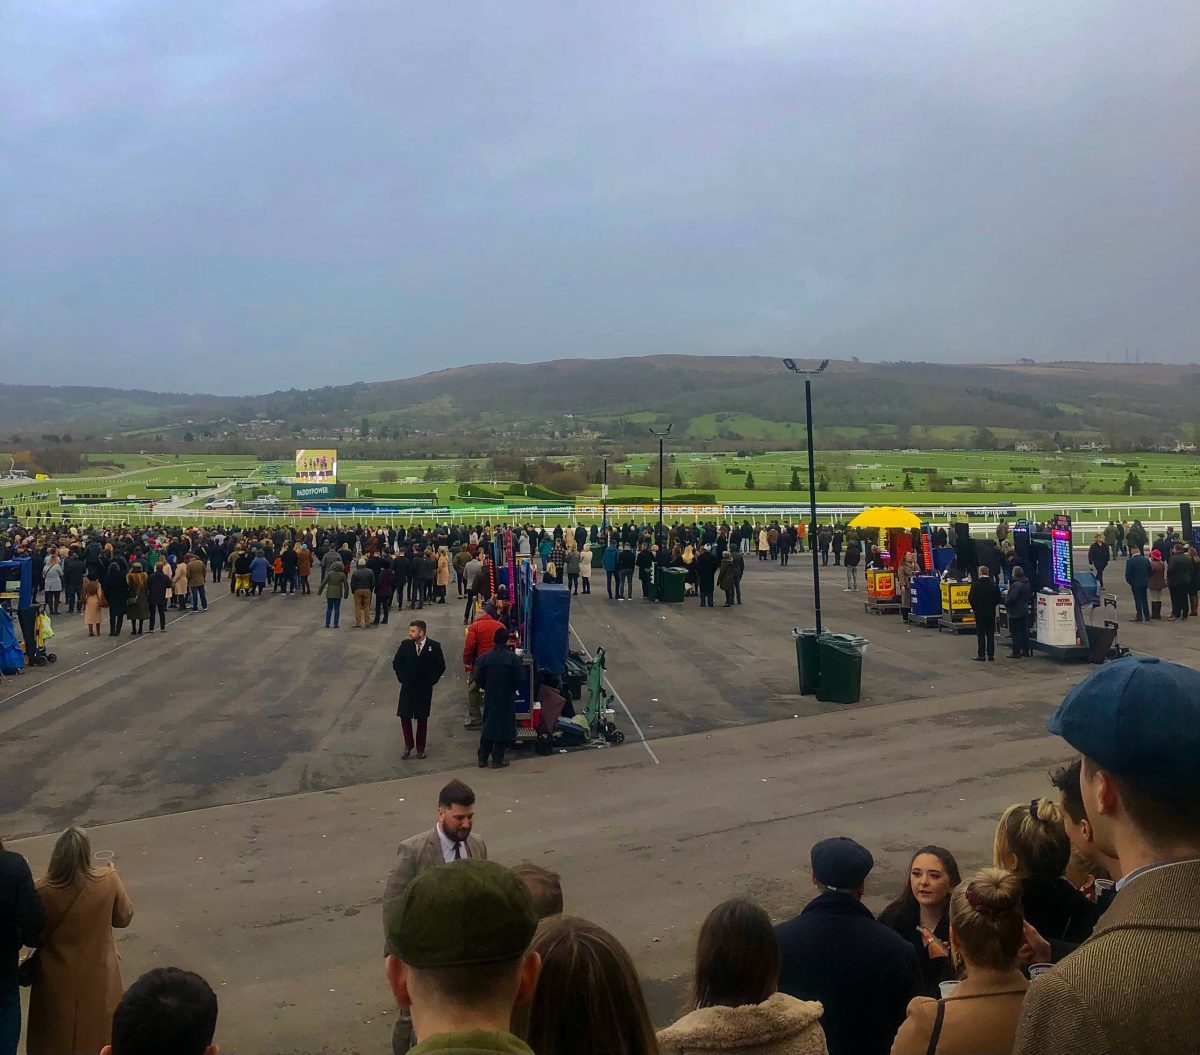 An image of the view from the Best Mates Enclosure at Cheltenham Racecourse.